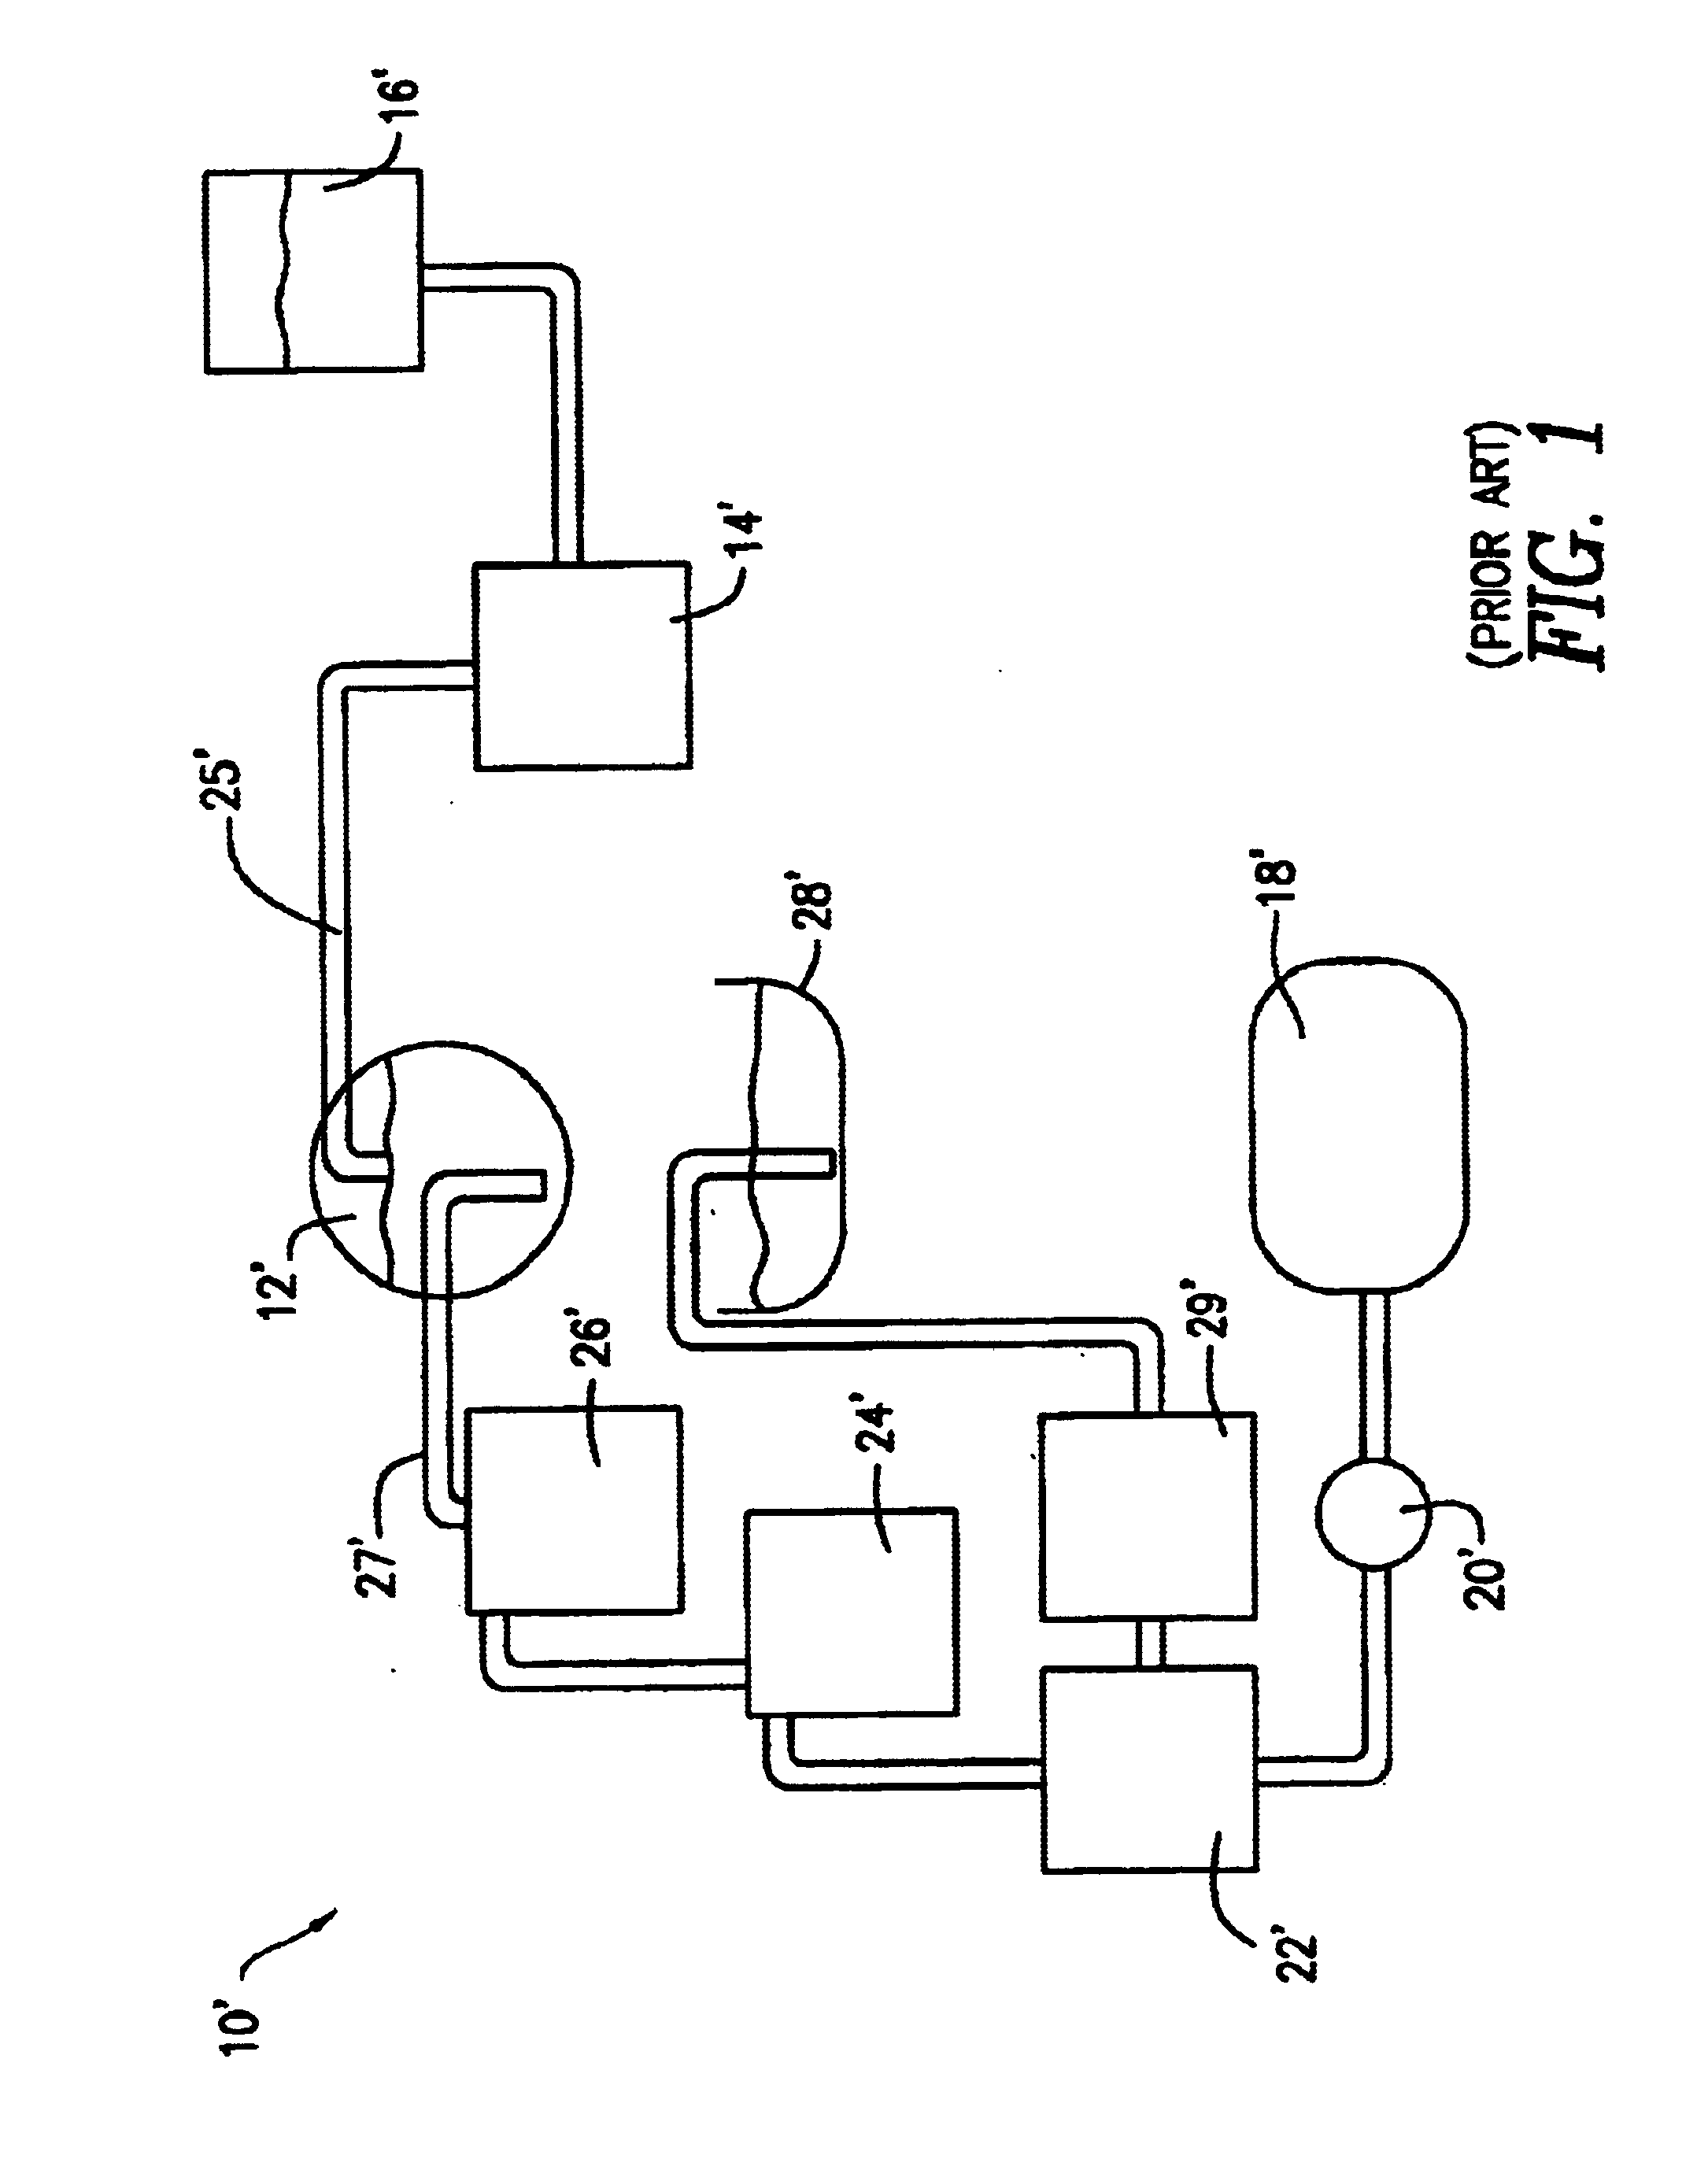 Surgical fluid management system with suction control